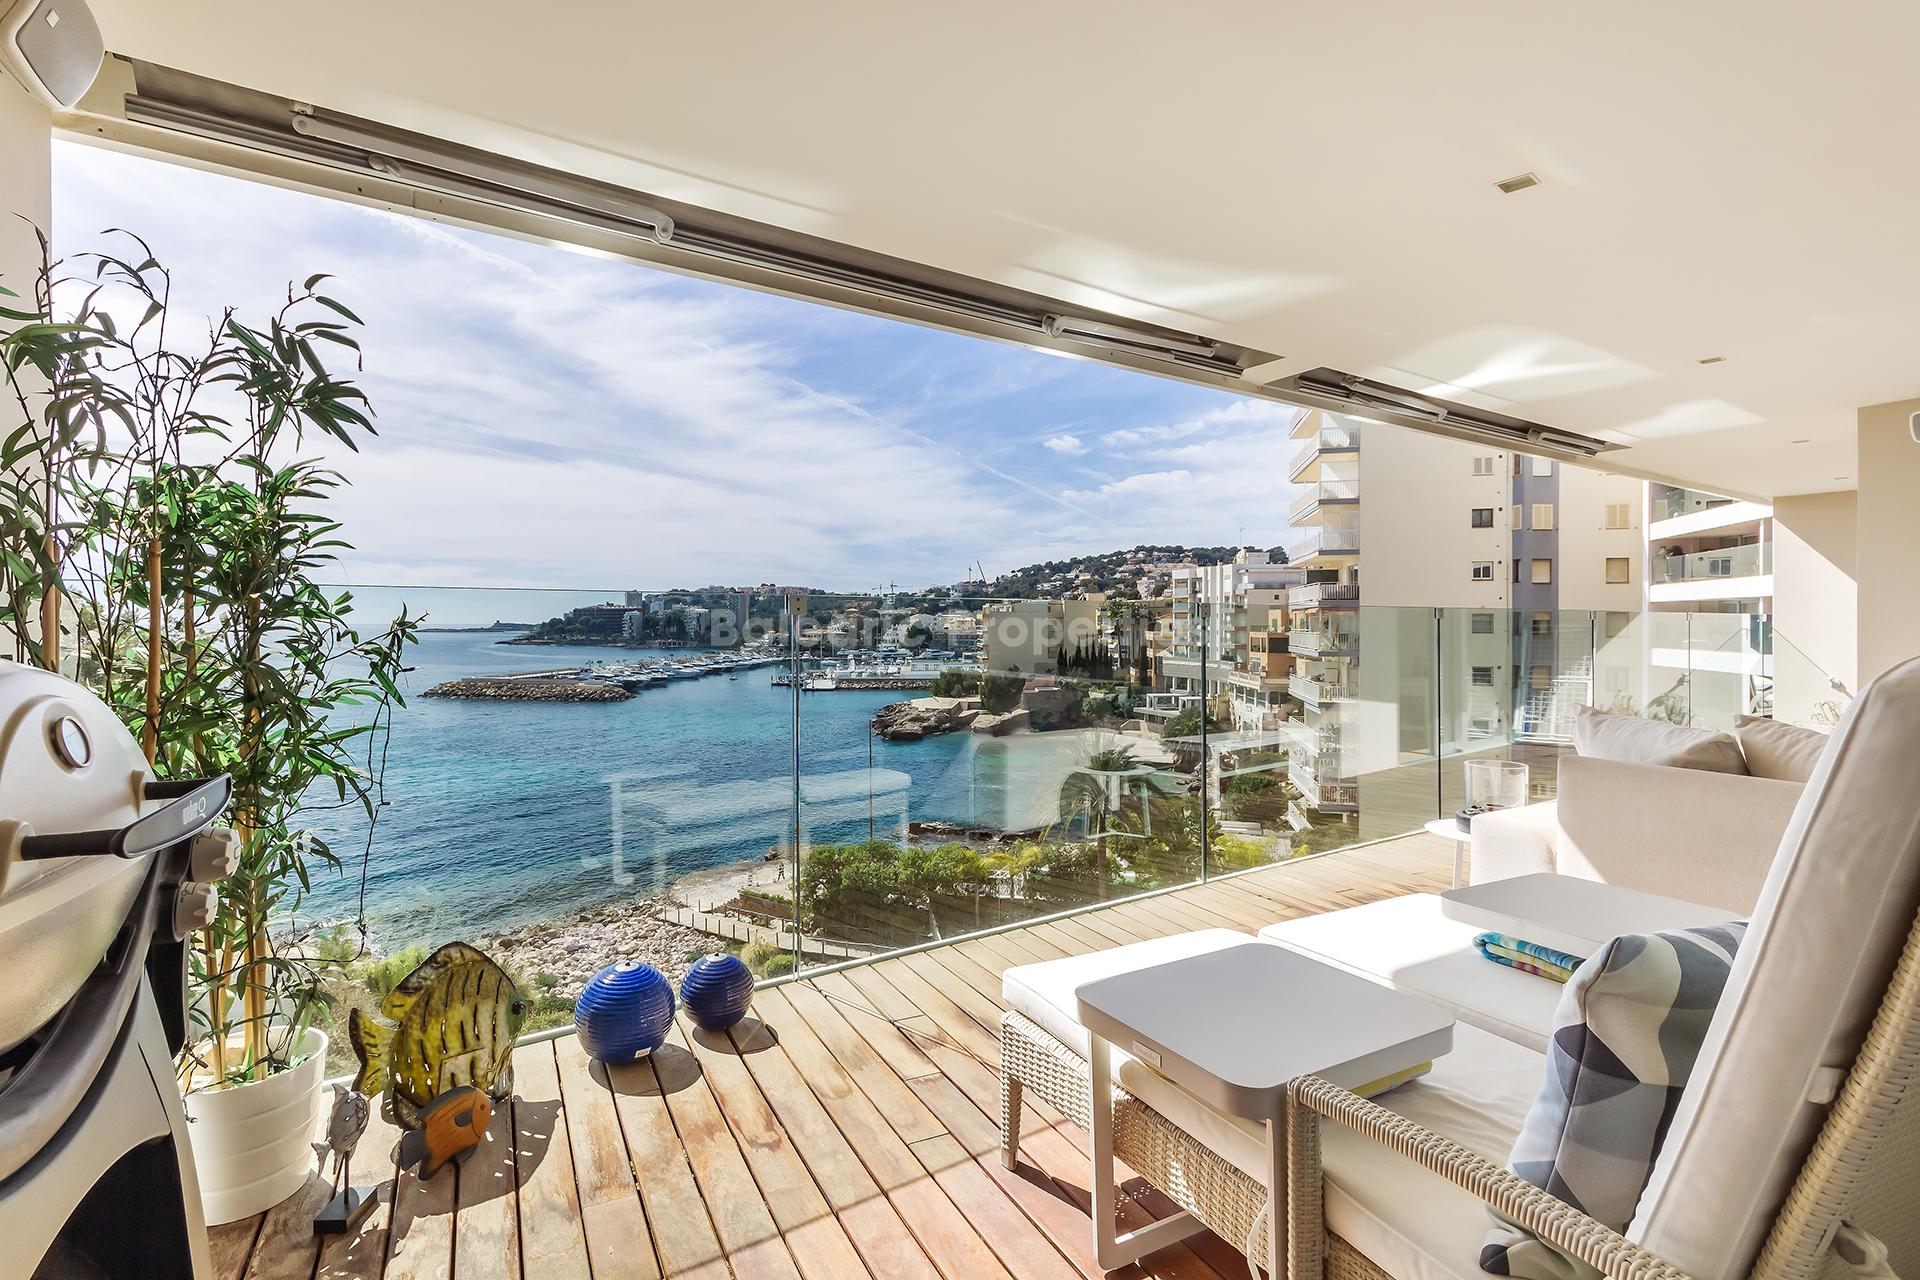 Front line apartment with luxury facilities for sale in Palma, Mallorca